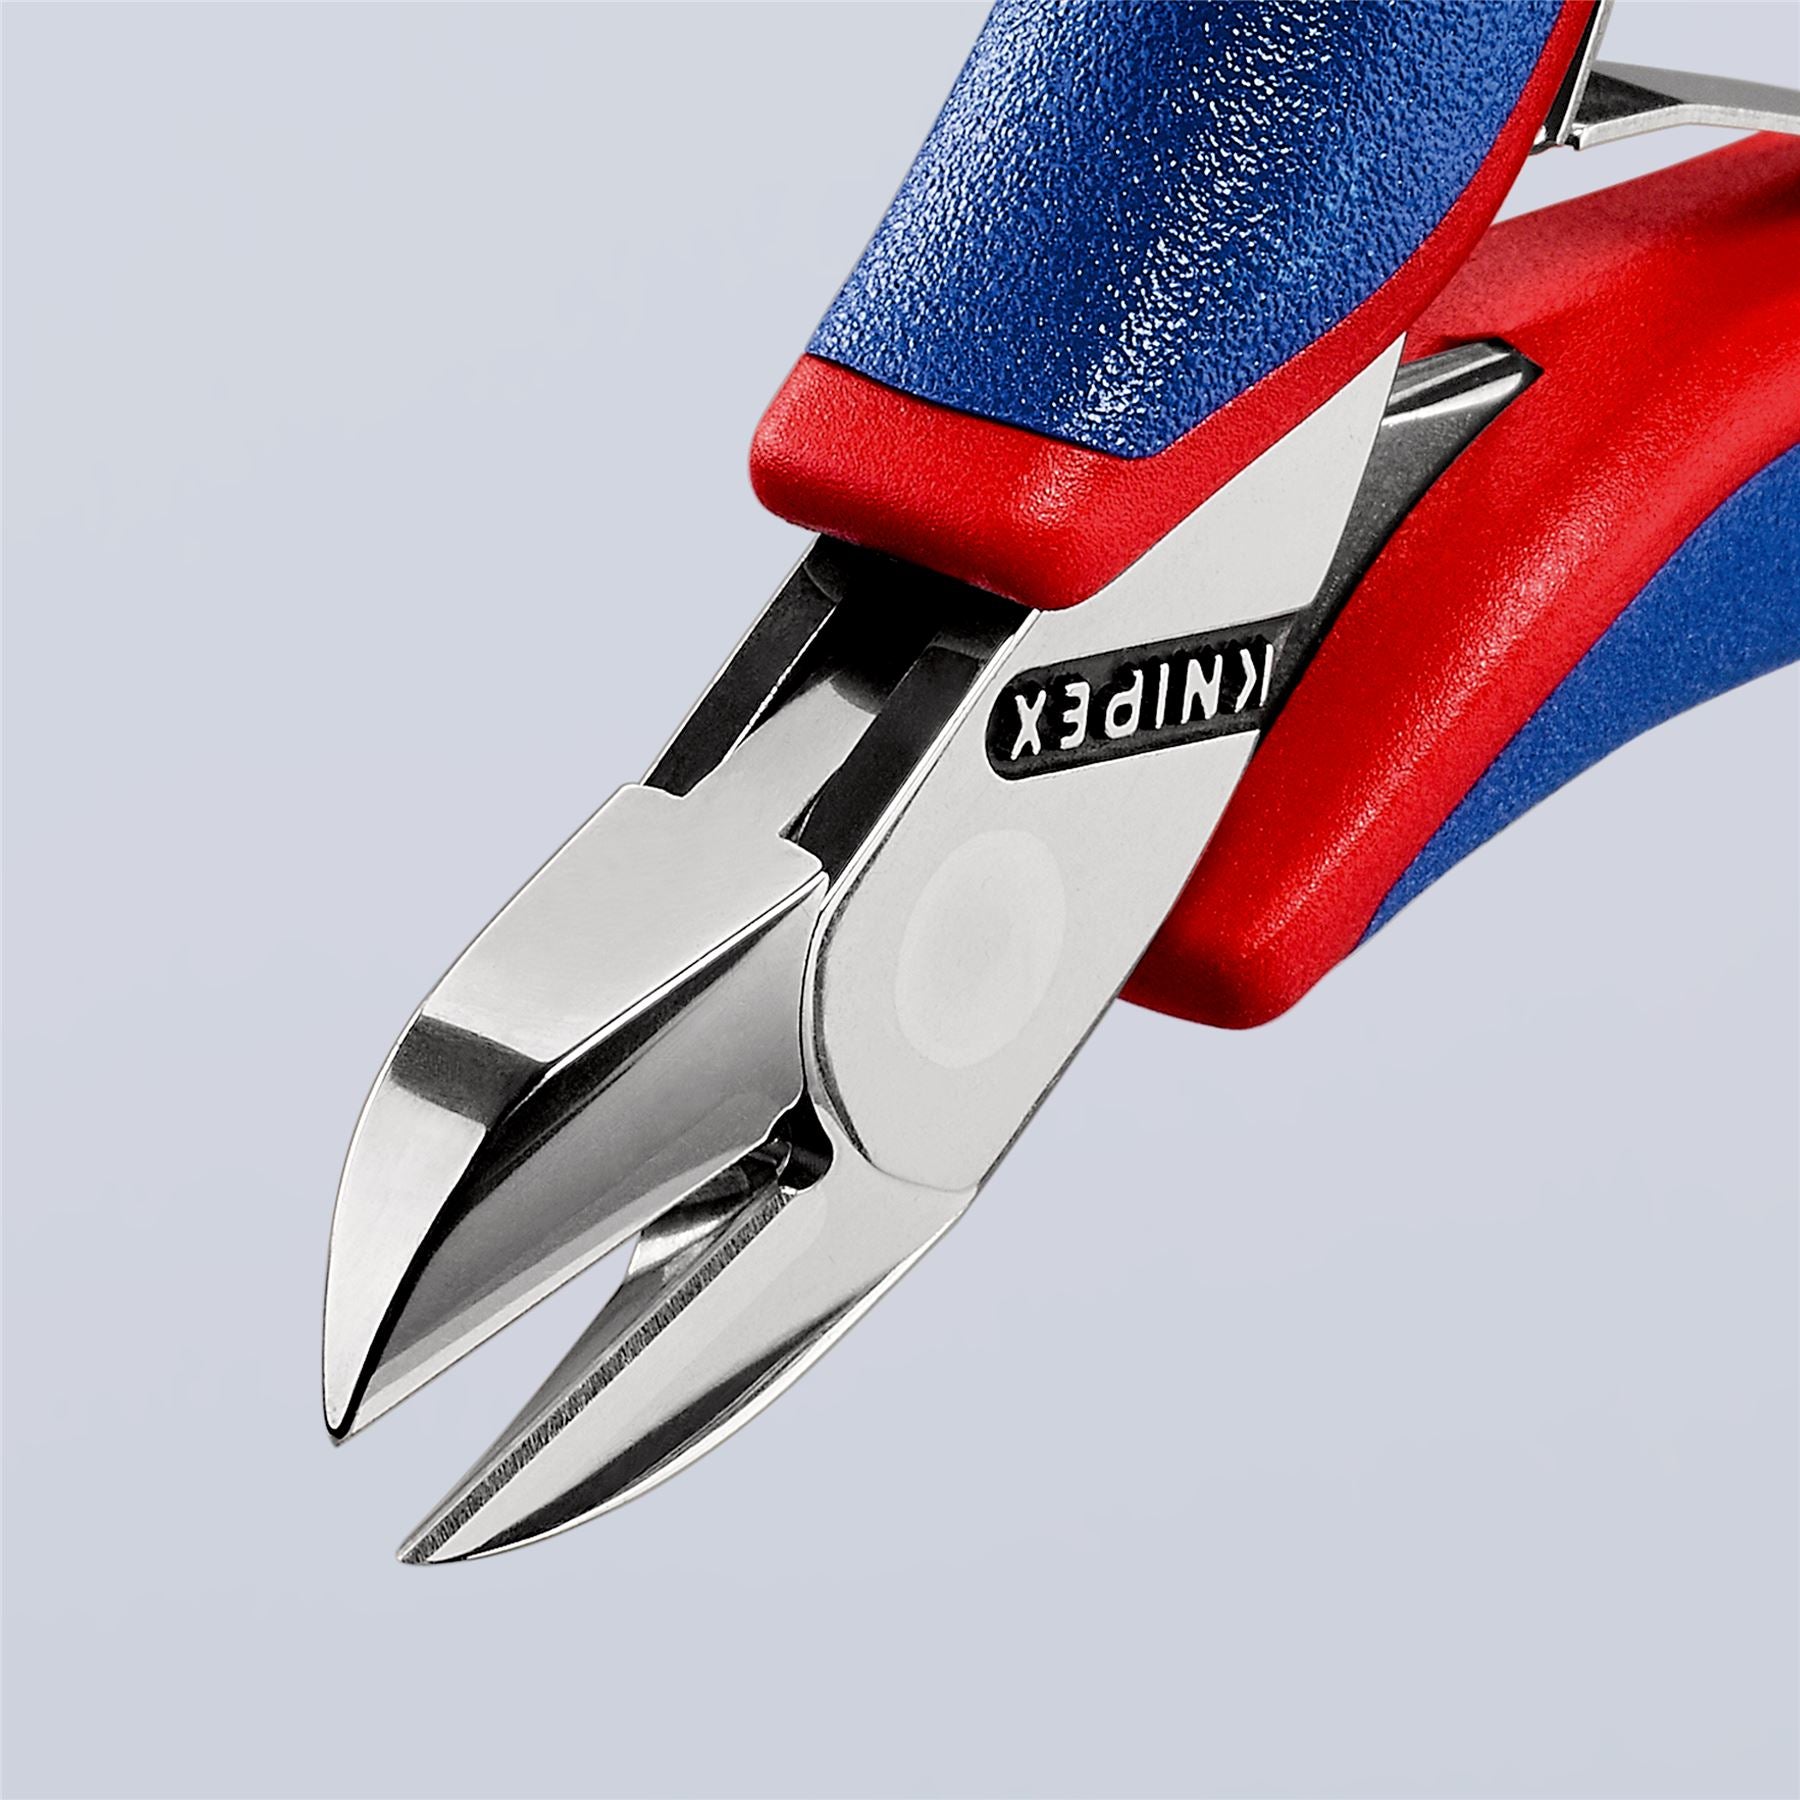 KNIPEX Electronics Diagonal Cutter Pliers with Carbide Cutting Edges 115mm Multi Component Grips 77 02 115